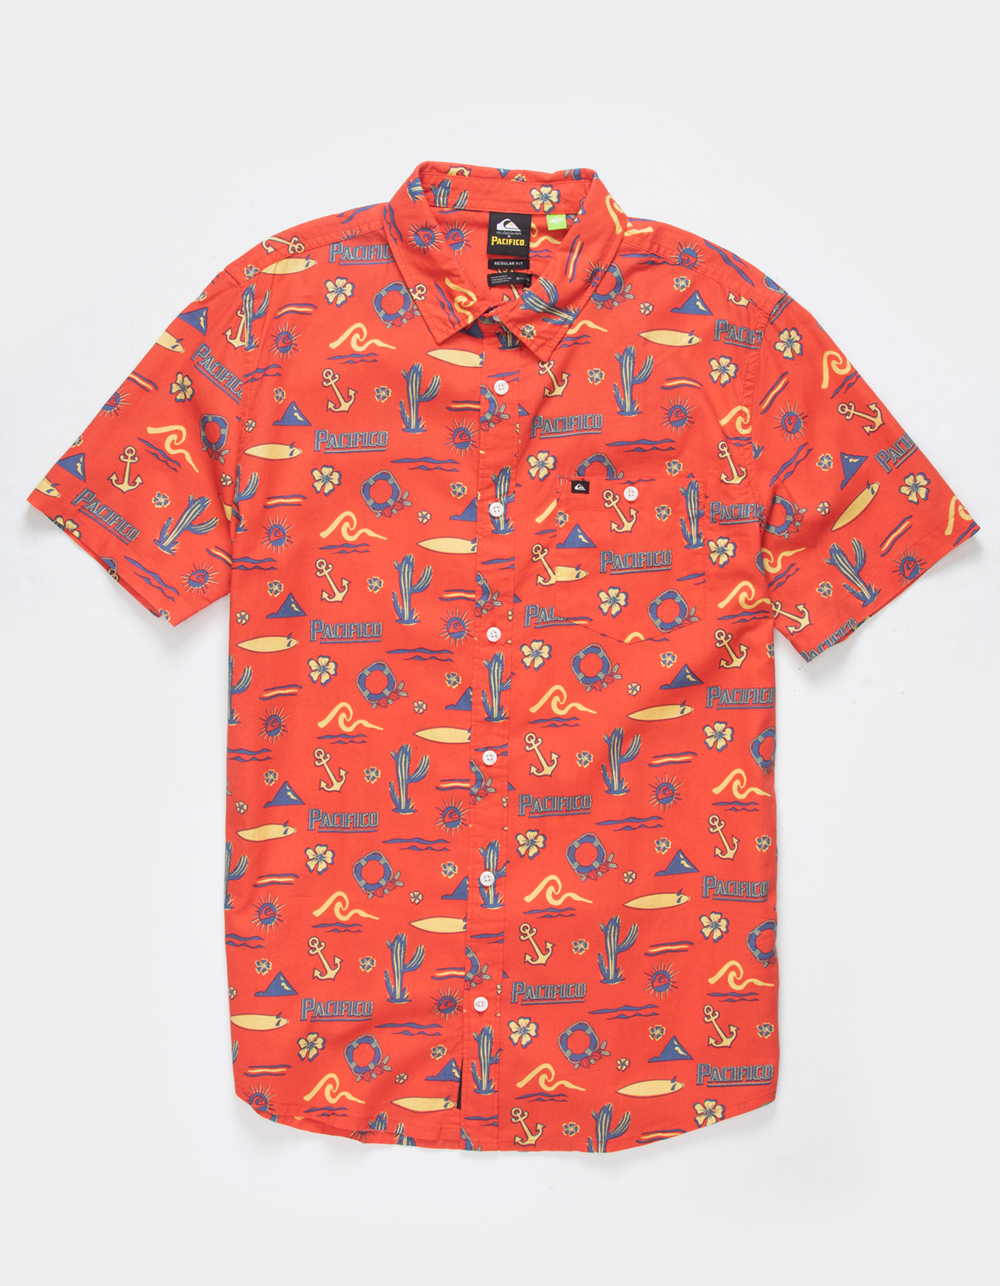 QUIKSILVER x Pacifico Mens Button Up Shirt - RED | Tillys